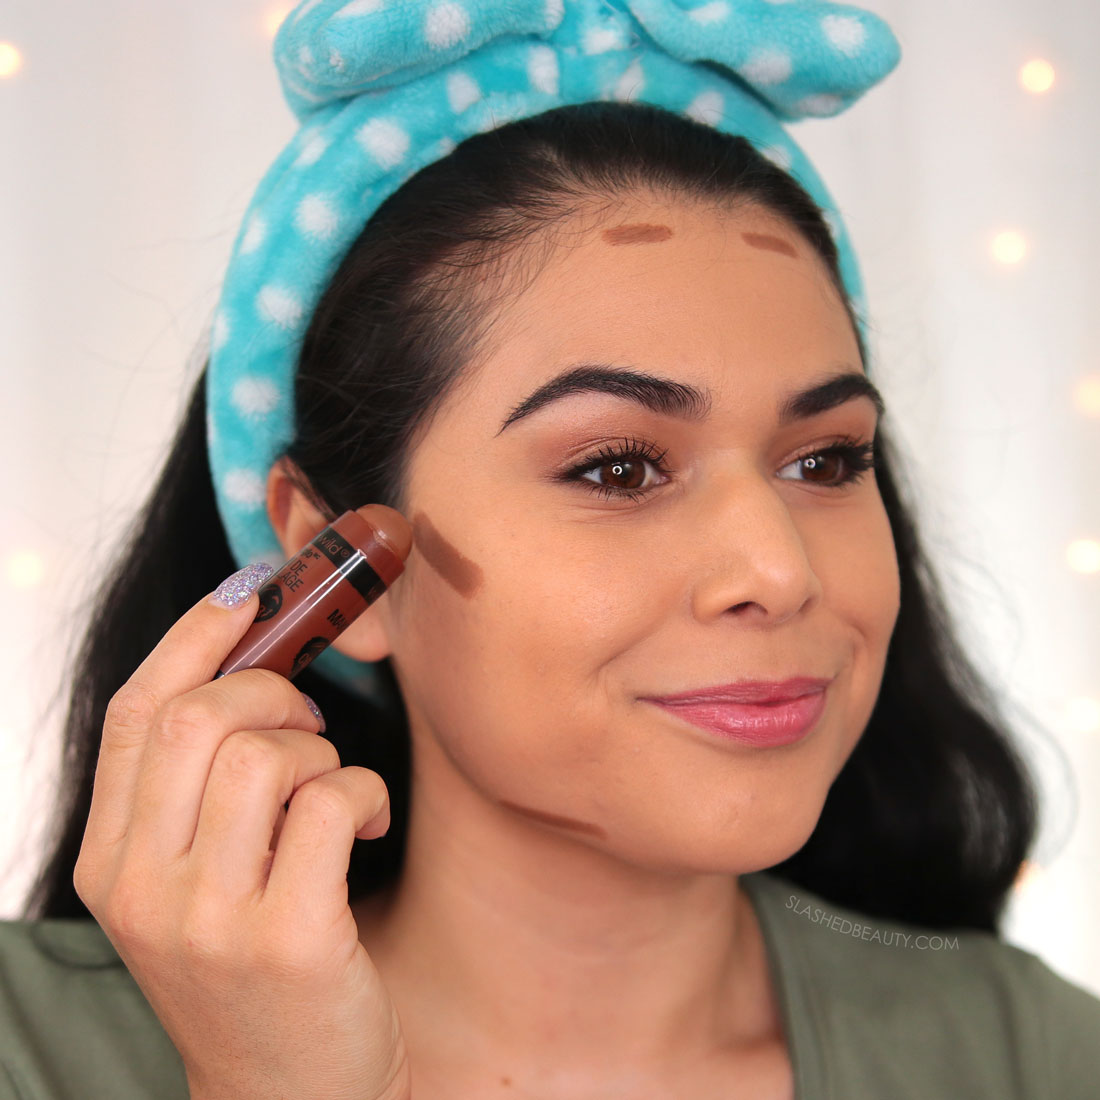 Miranda applying short strokes of the wet n wild MegaGlo Contour Stick to the cheeks, forehead and jawline | How to Use a Contour Stick: 5 Tips & Mistakes to Avoid | Slashed Beauty